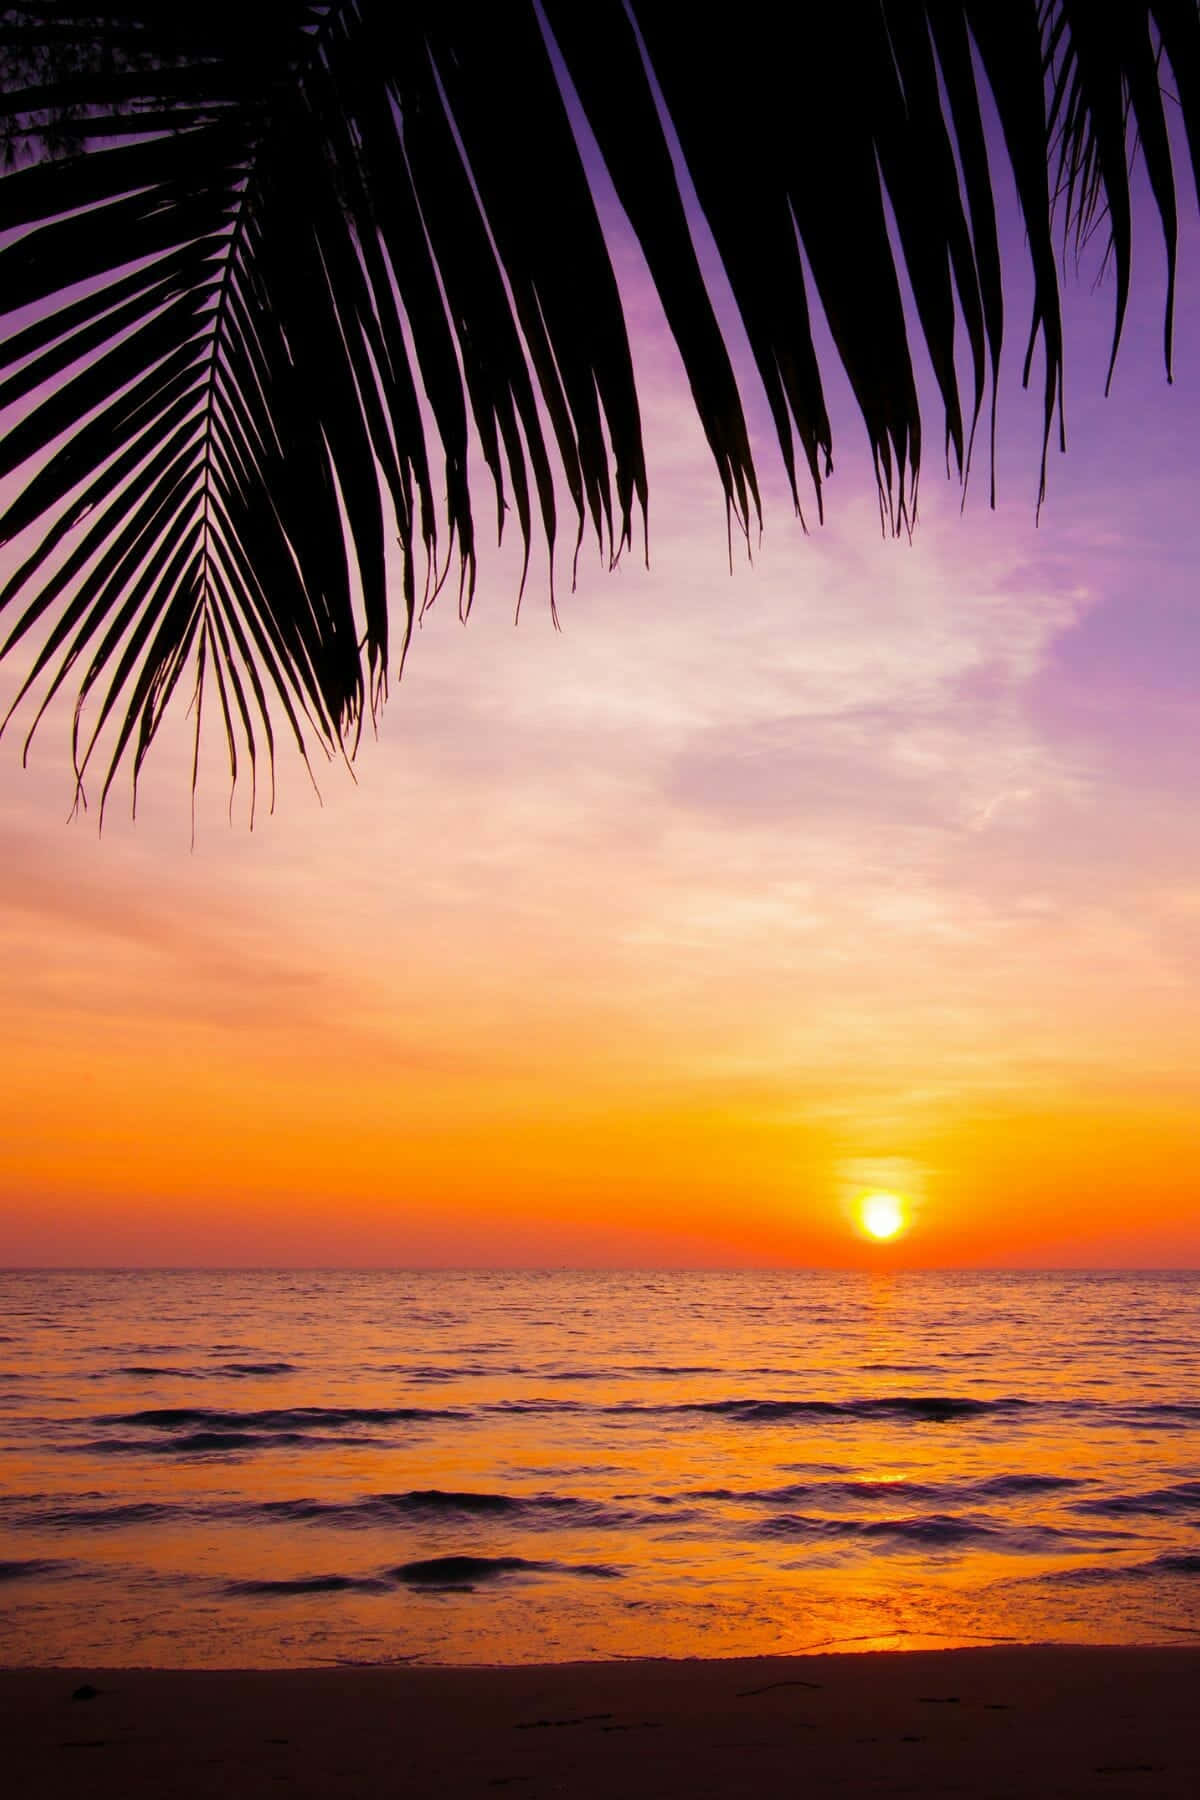 Soak Up the Last Rays of Light and Enjoy the Magic of a Beach Sunset